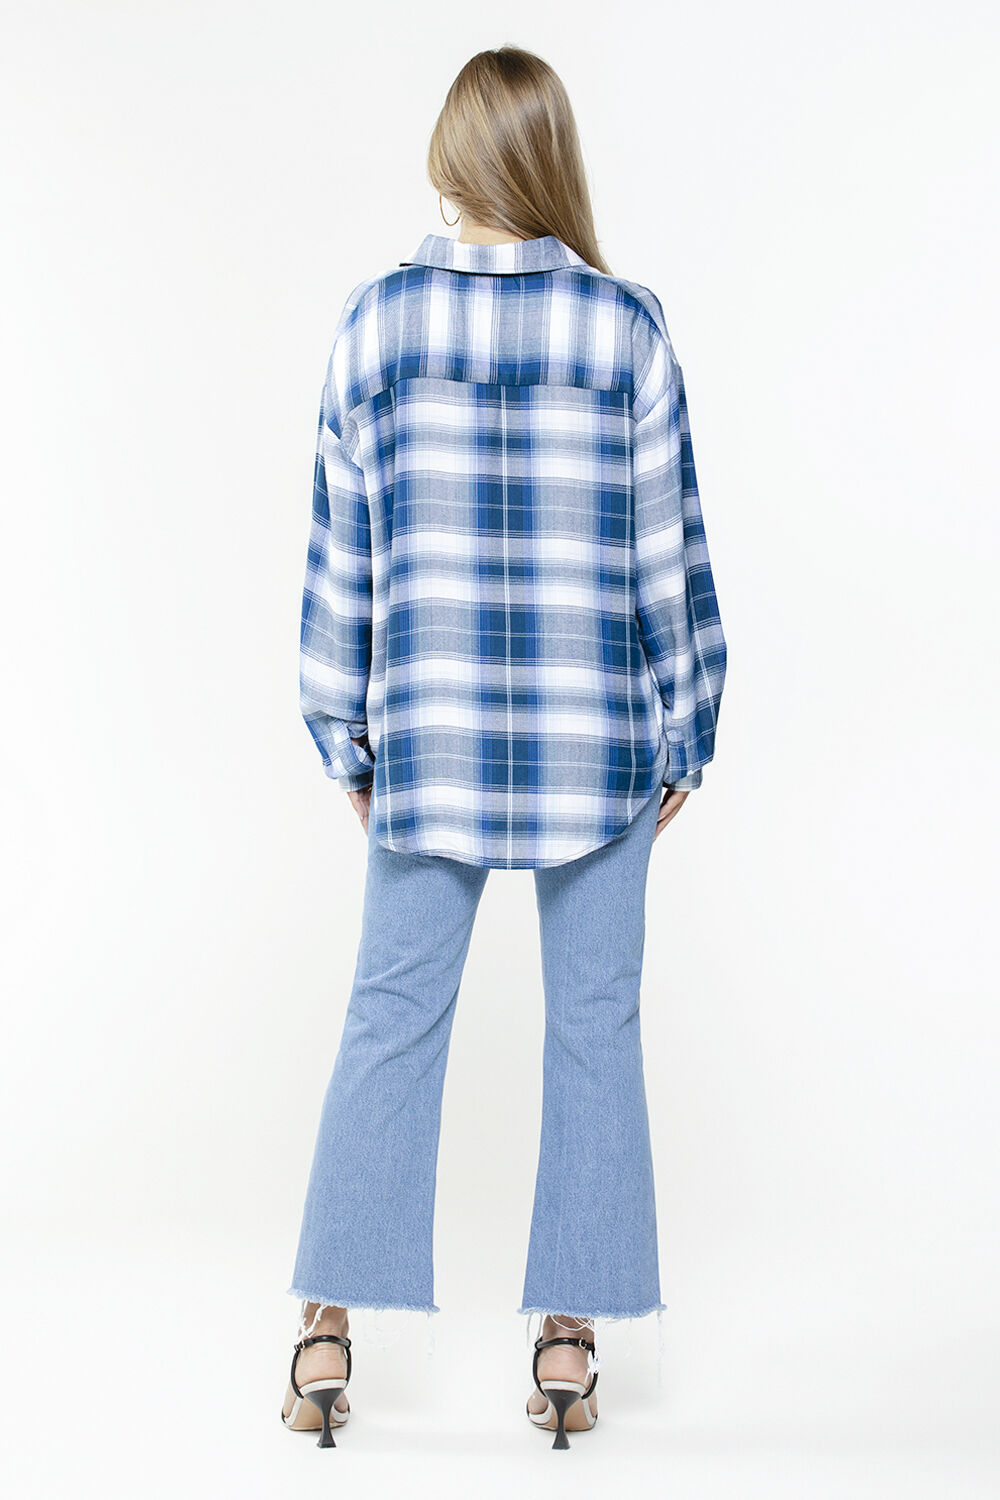 CLASSIC CHECK SHIRT in colour ANGEL FALLS